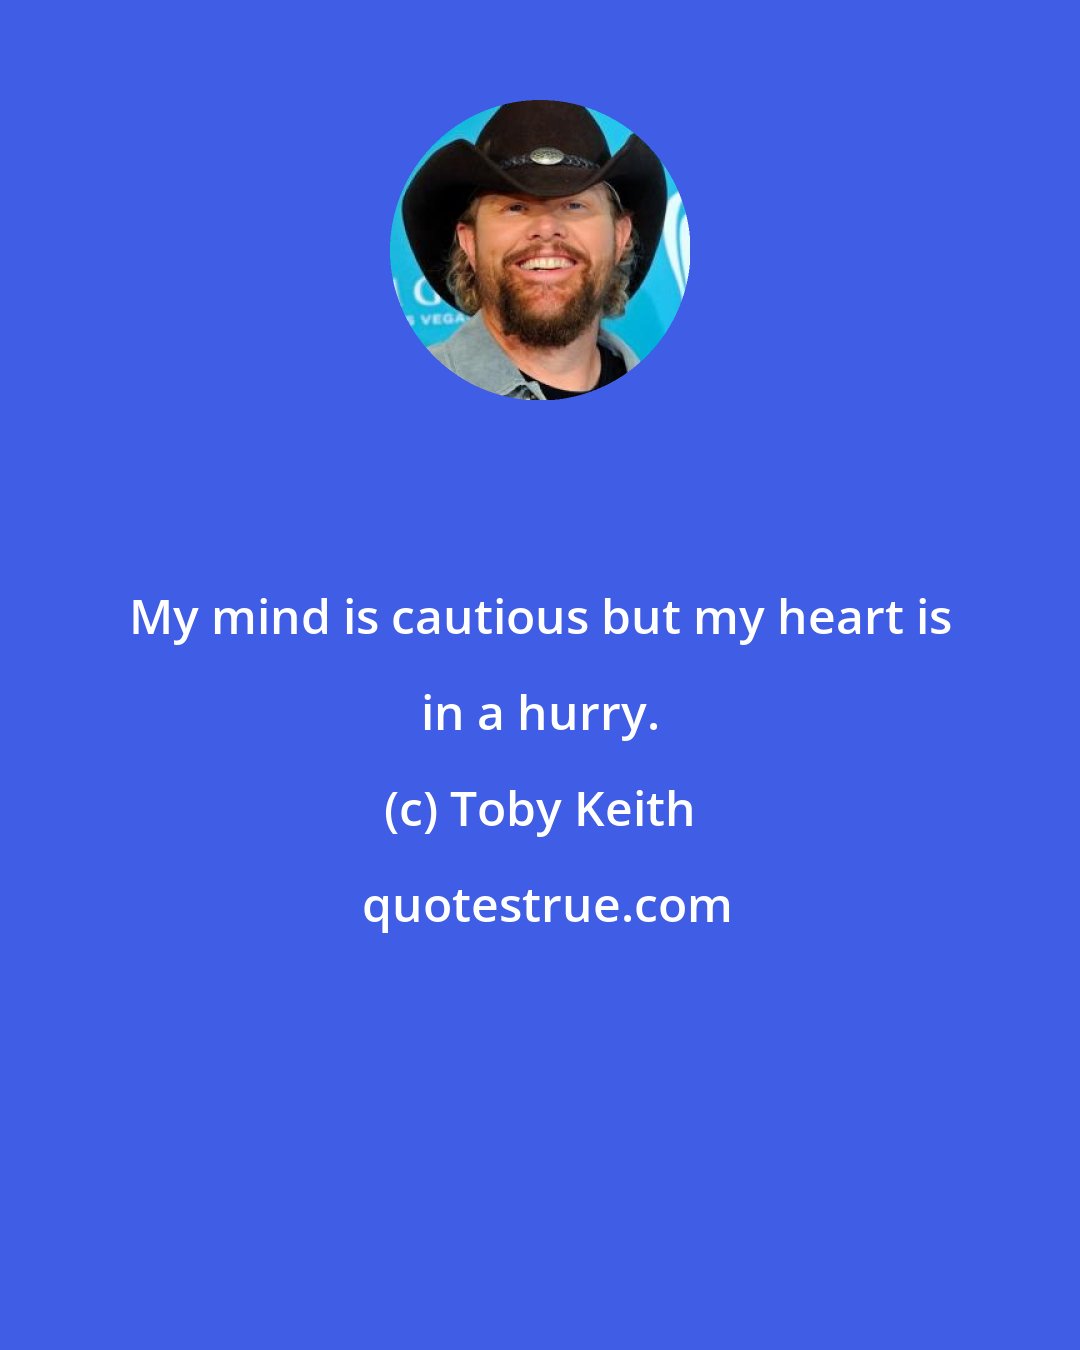 Toby Keith: My mind is cautious but my heart is in a hurry.